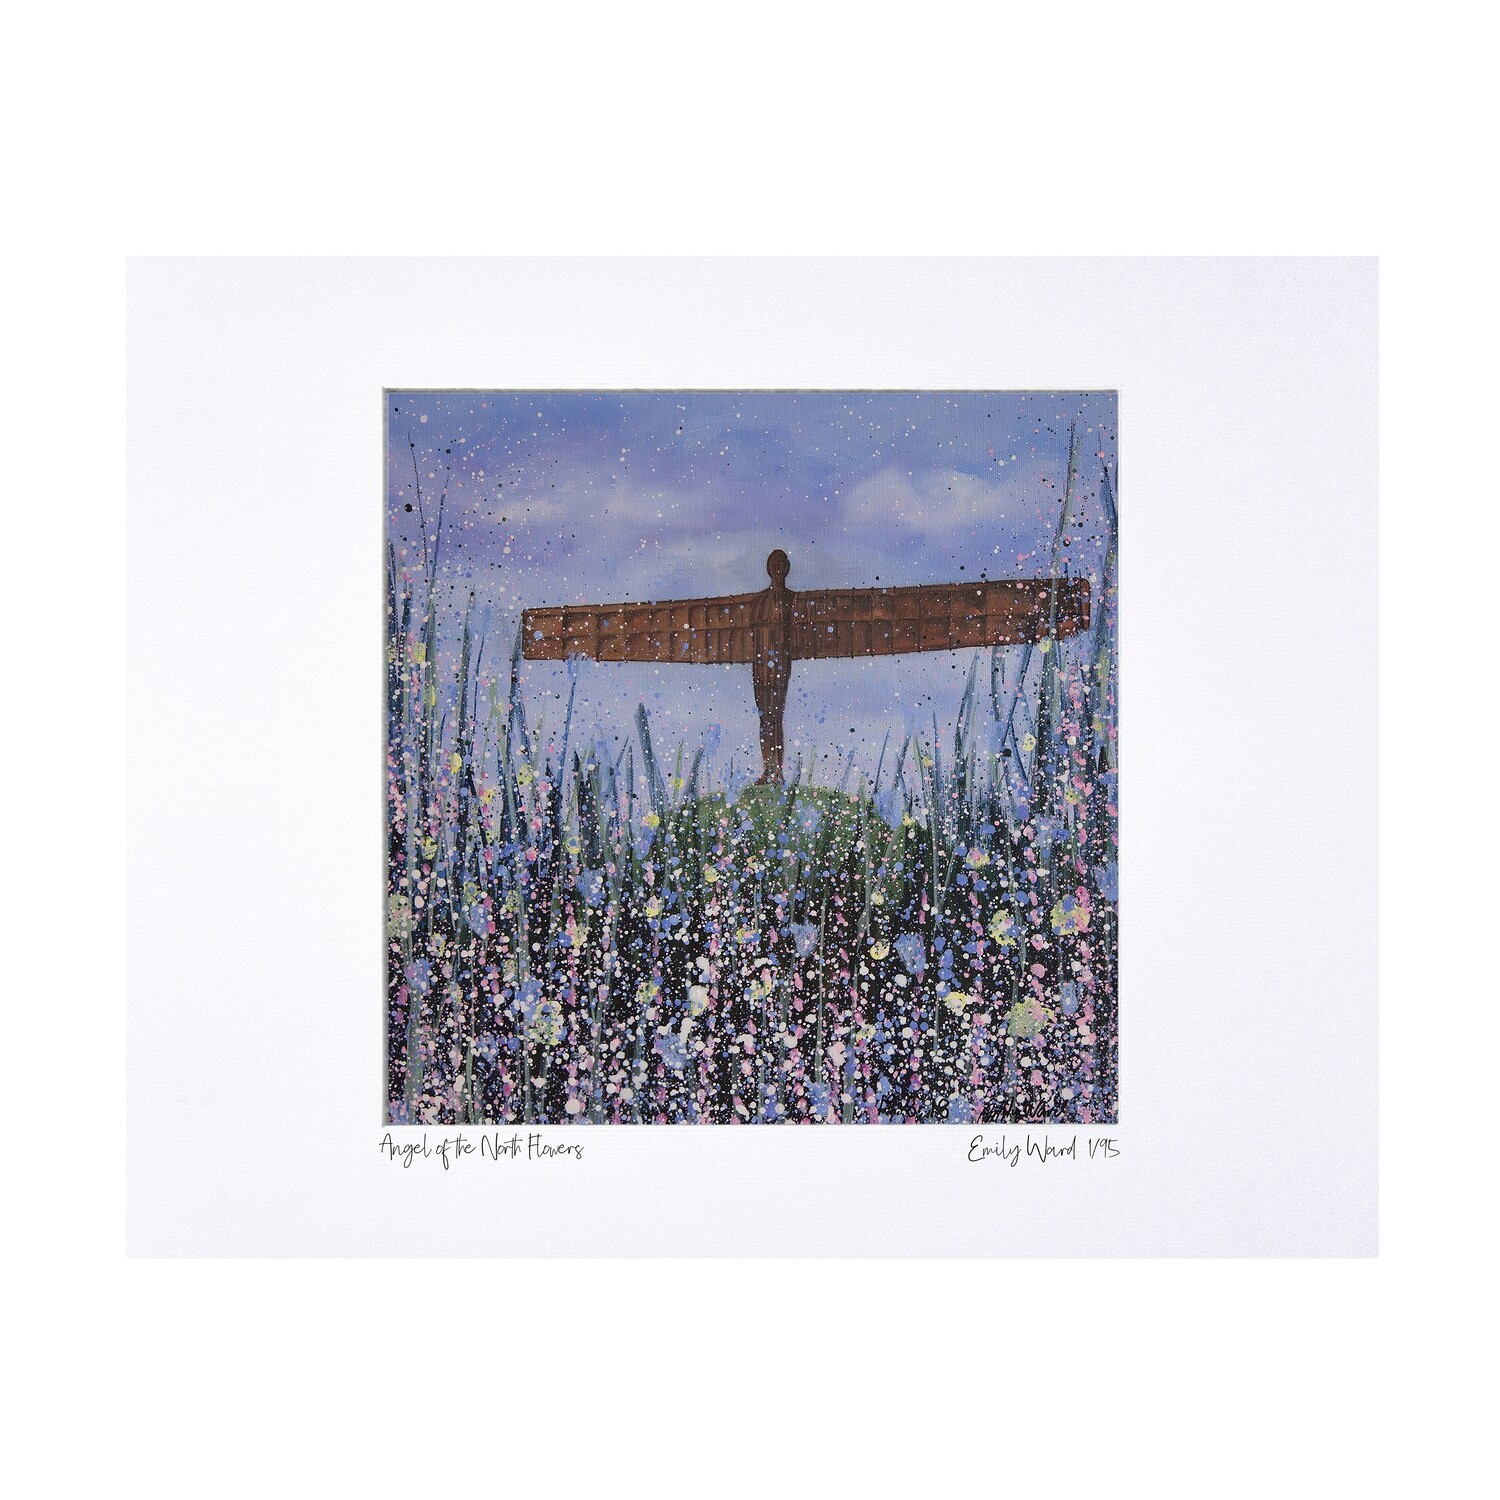 Angel of the North Flowers Print - Limited Edition